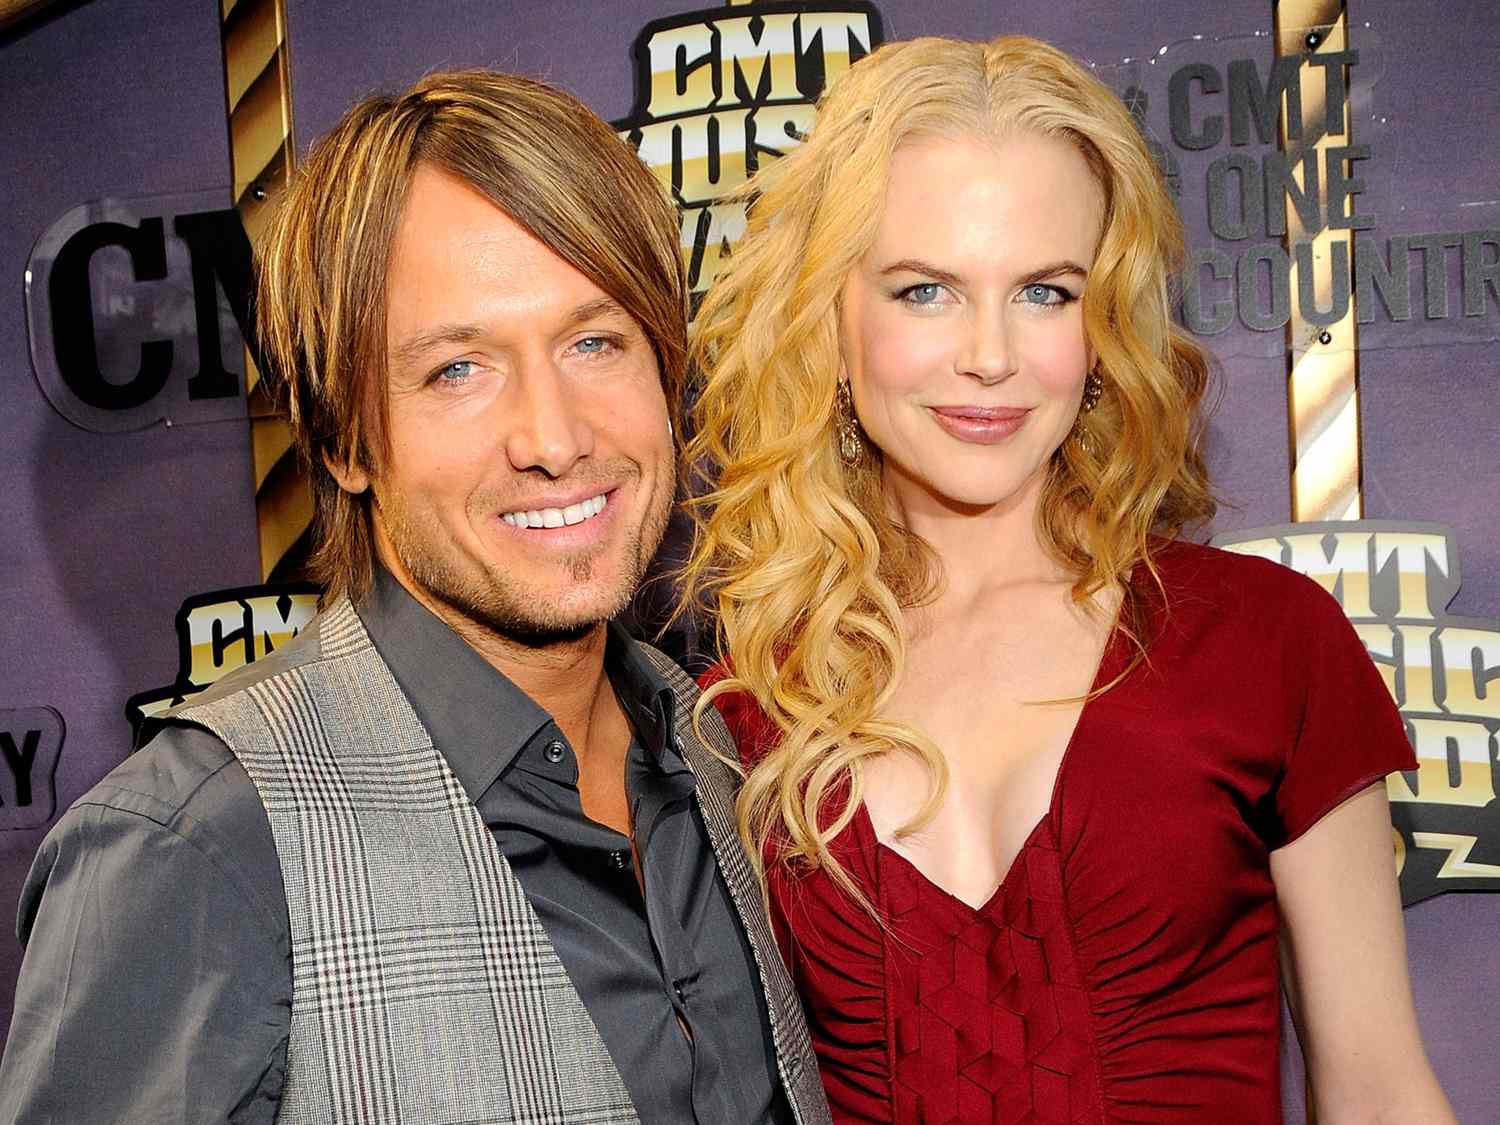 Keith Urban and actress Nicole Kidman attend the 2008 CMT Music Awards at Curb Event Center at Belmont University on April 14, 2008 in Nashville, Tennessee